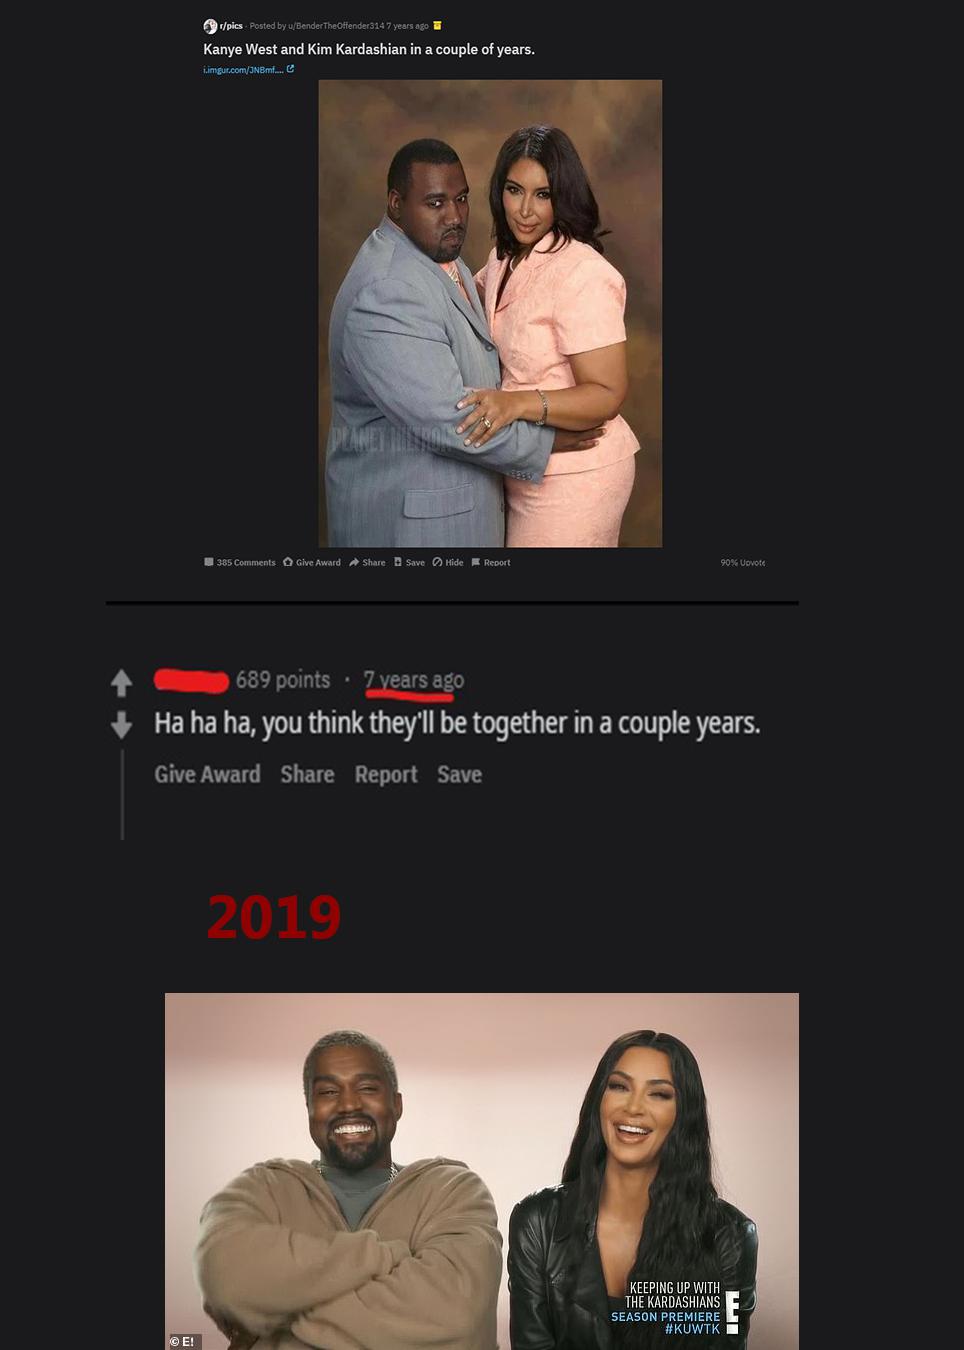 conversation - pics Posted by uBender TheOftender314 7 years ago a Kanye West and Kim Kardashian in a couple of years. i.imgur.comJNBmf.... C 385 Give Award Save Hide Report 90% Uovote 689 points . 7 years ago Ha ha ha, you think they'll be together in a 